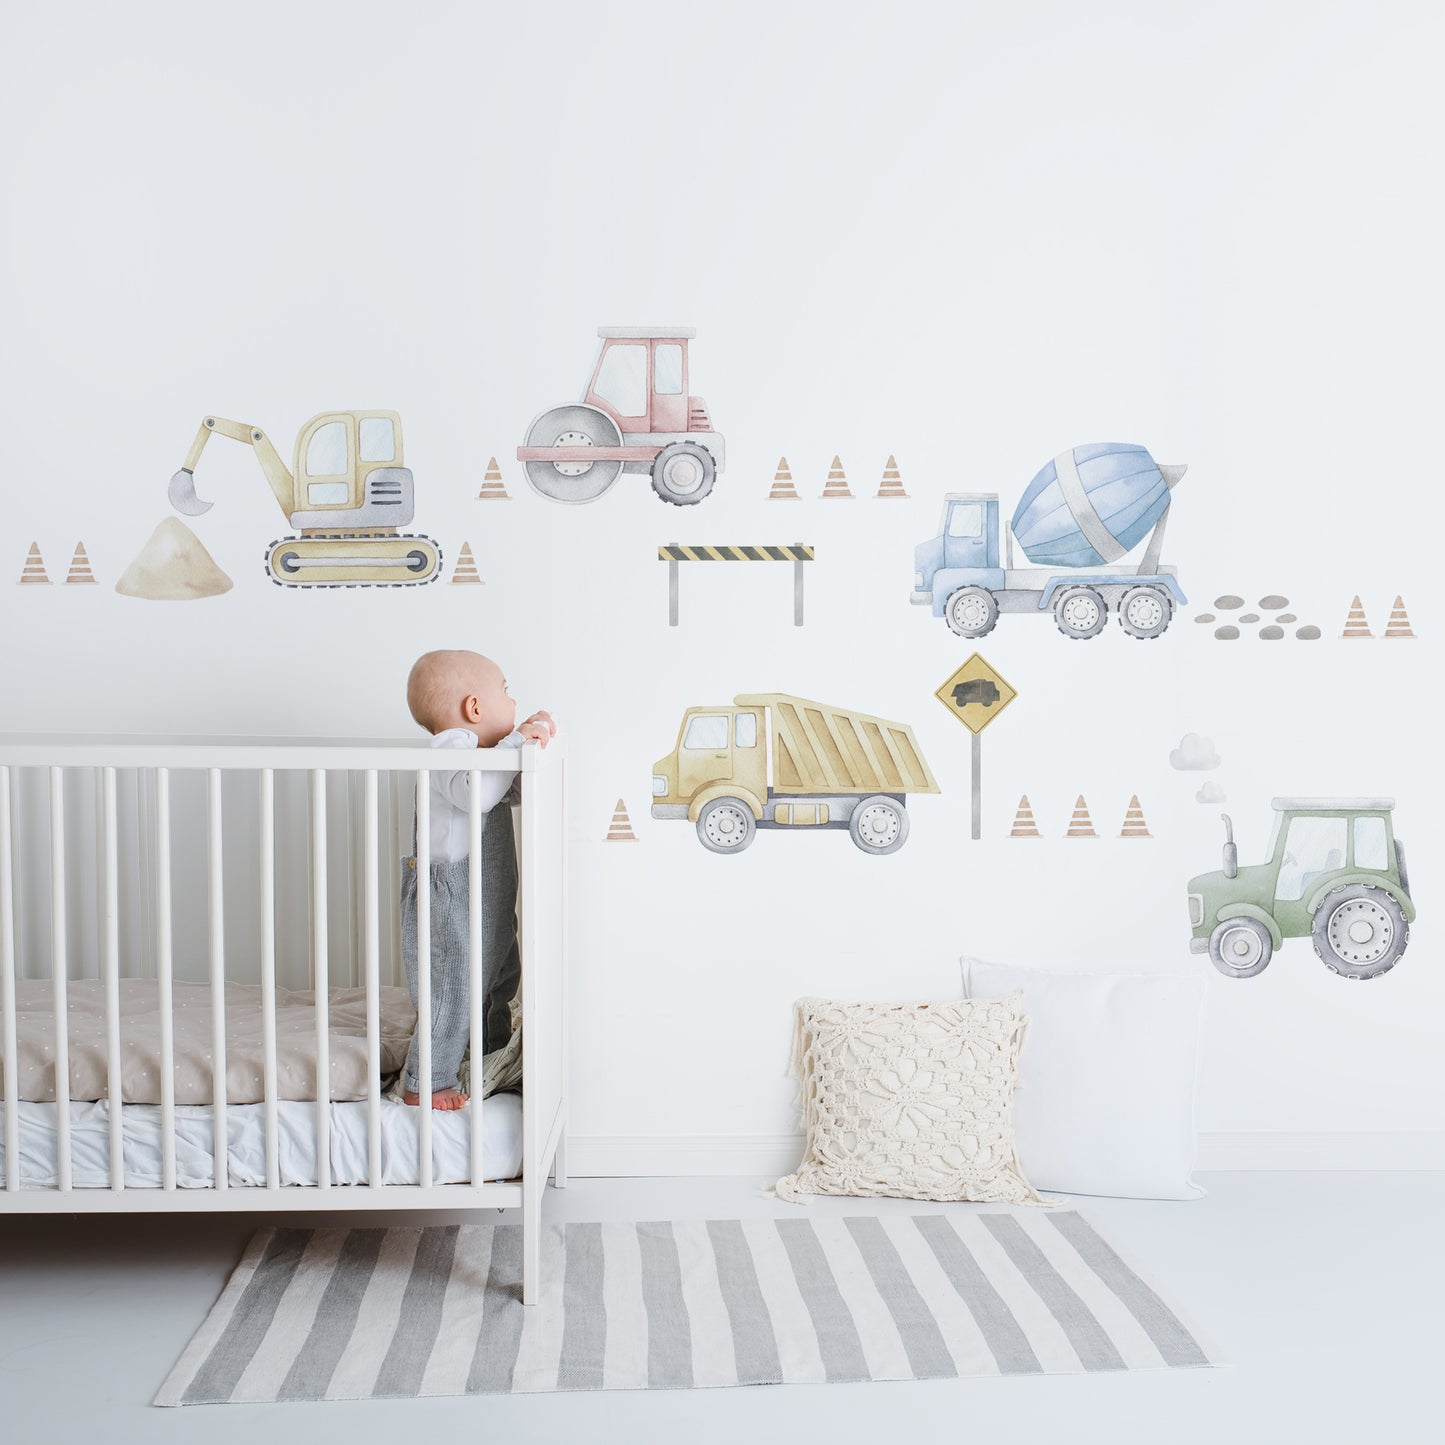 Construction Wall Decals - Wall Decals Australia - Fable and Fawn 